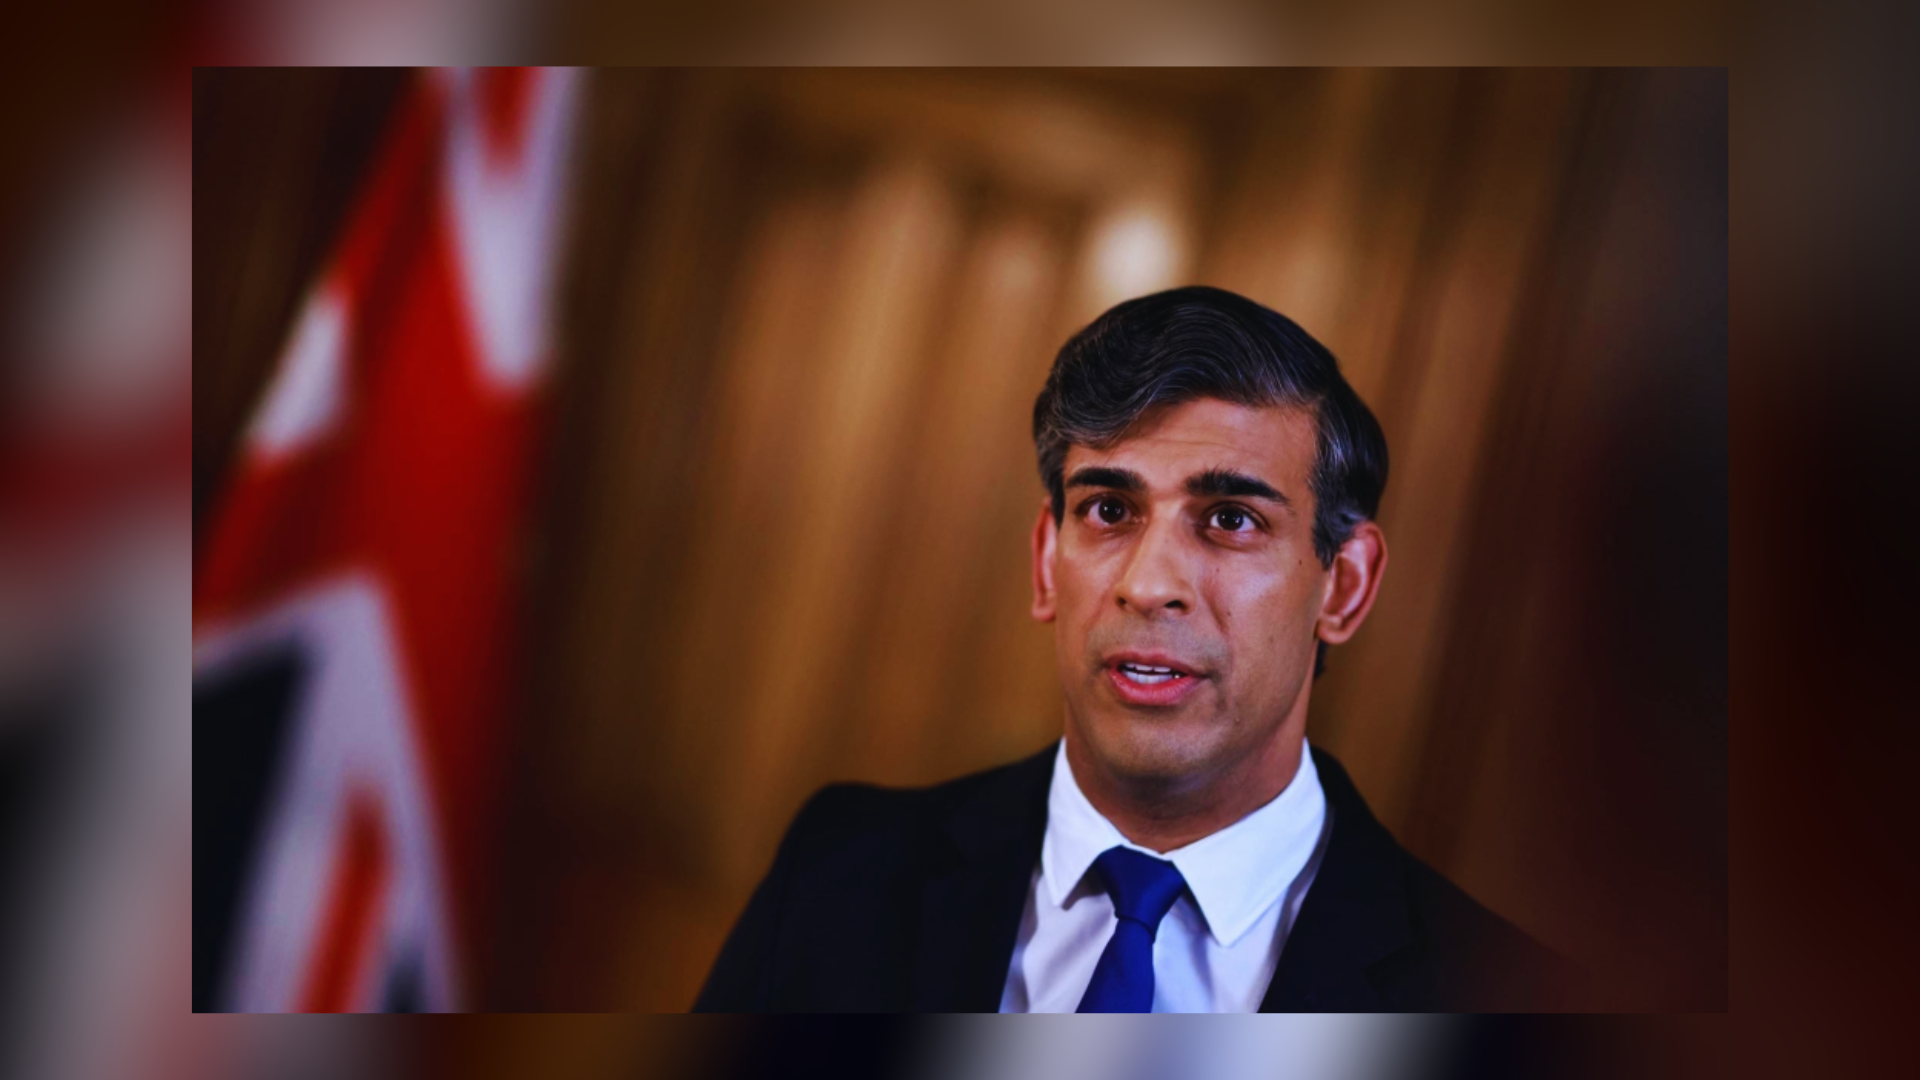 Rishi Sunak’s Future On The Line As UK Heads To Local Polls This Week